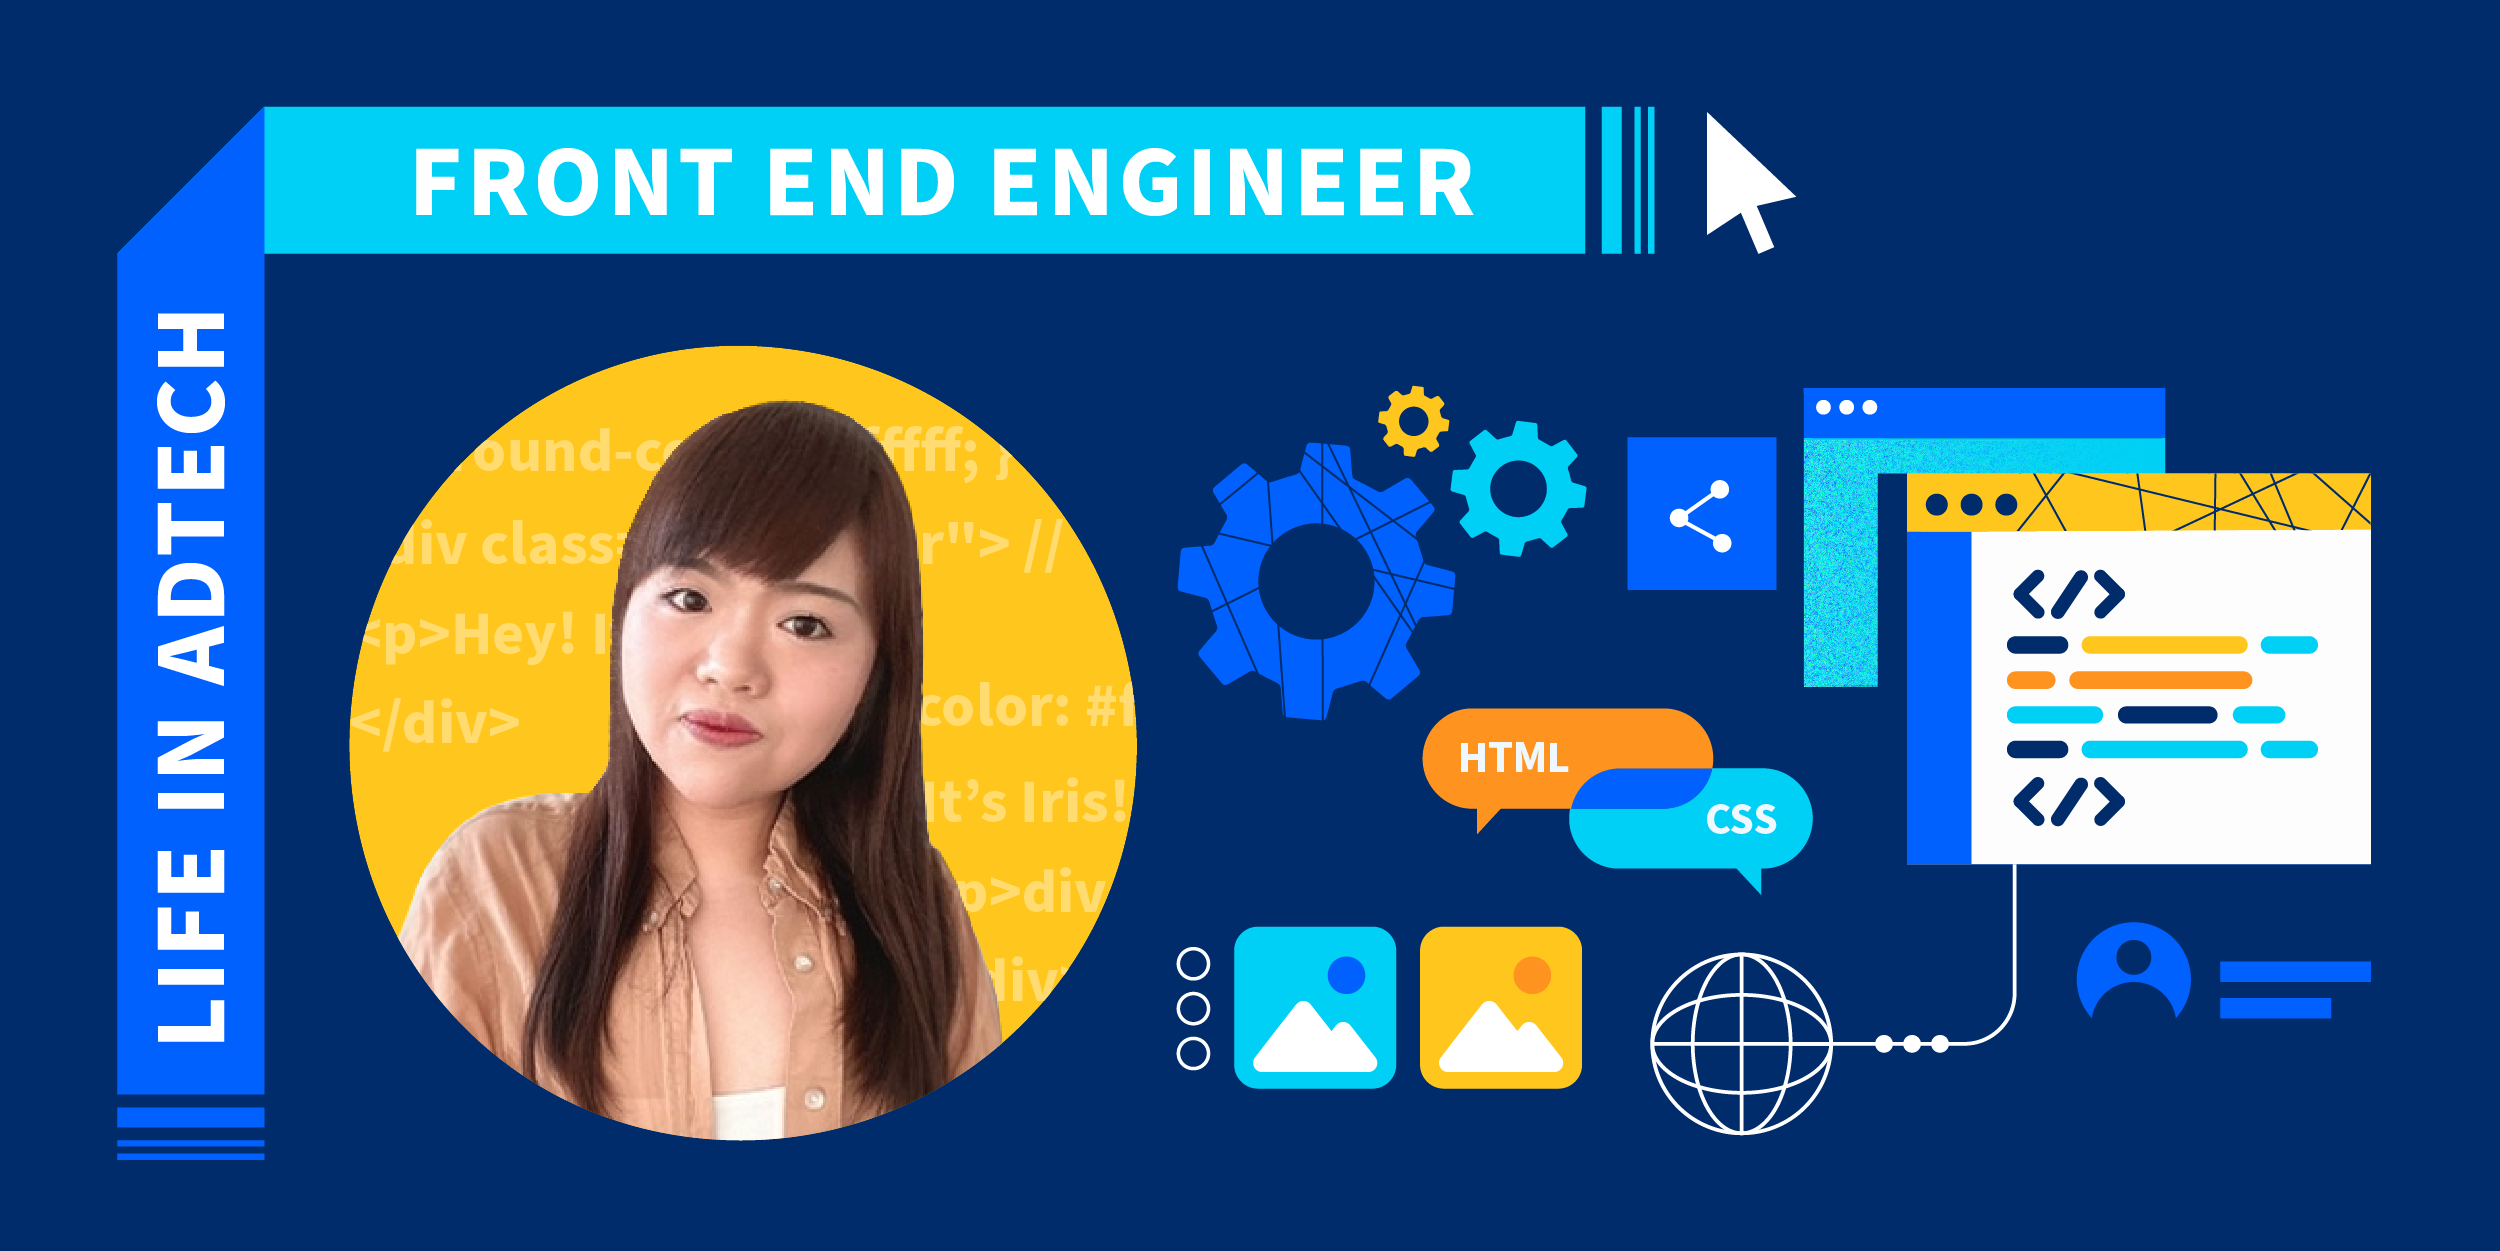 Life in AdTech: Creating a Progressive Engineering Culture